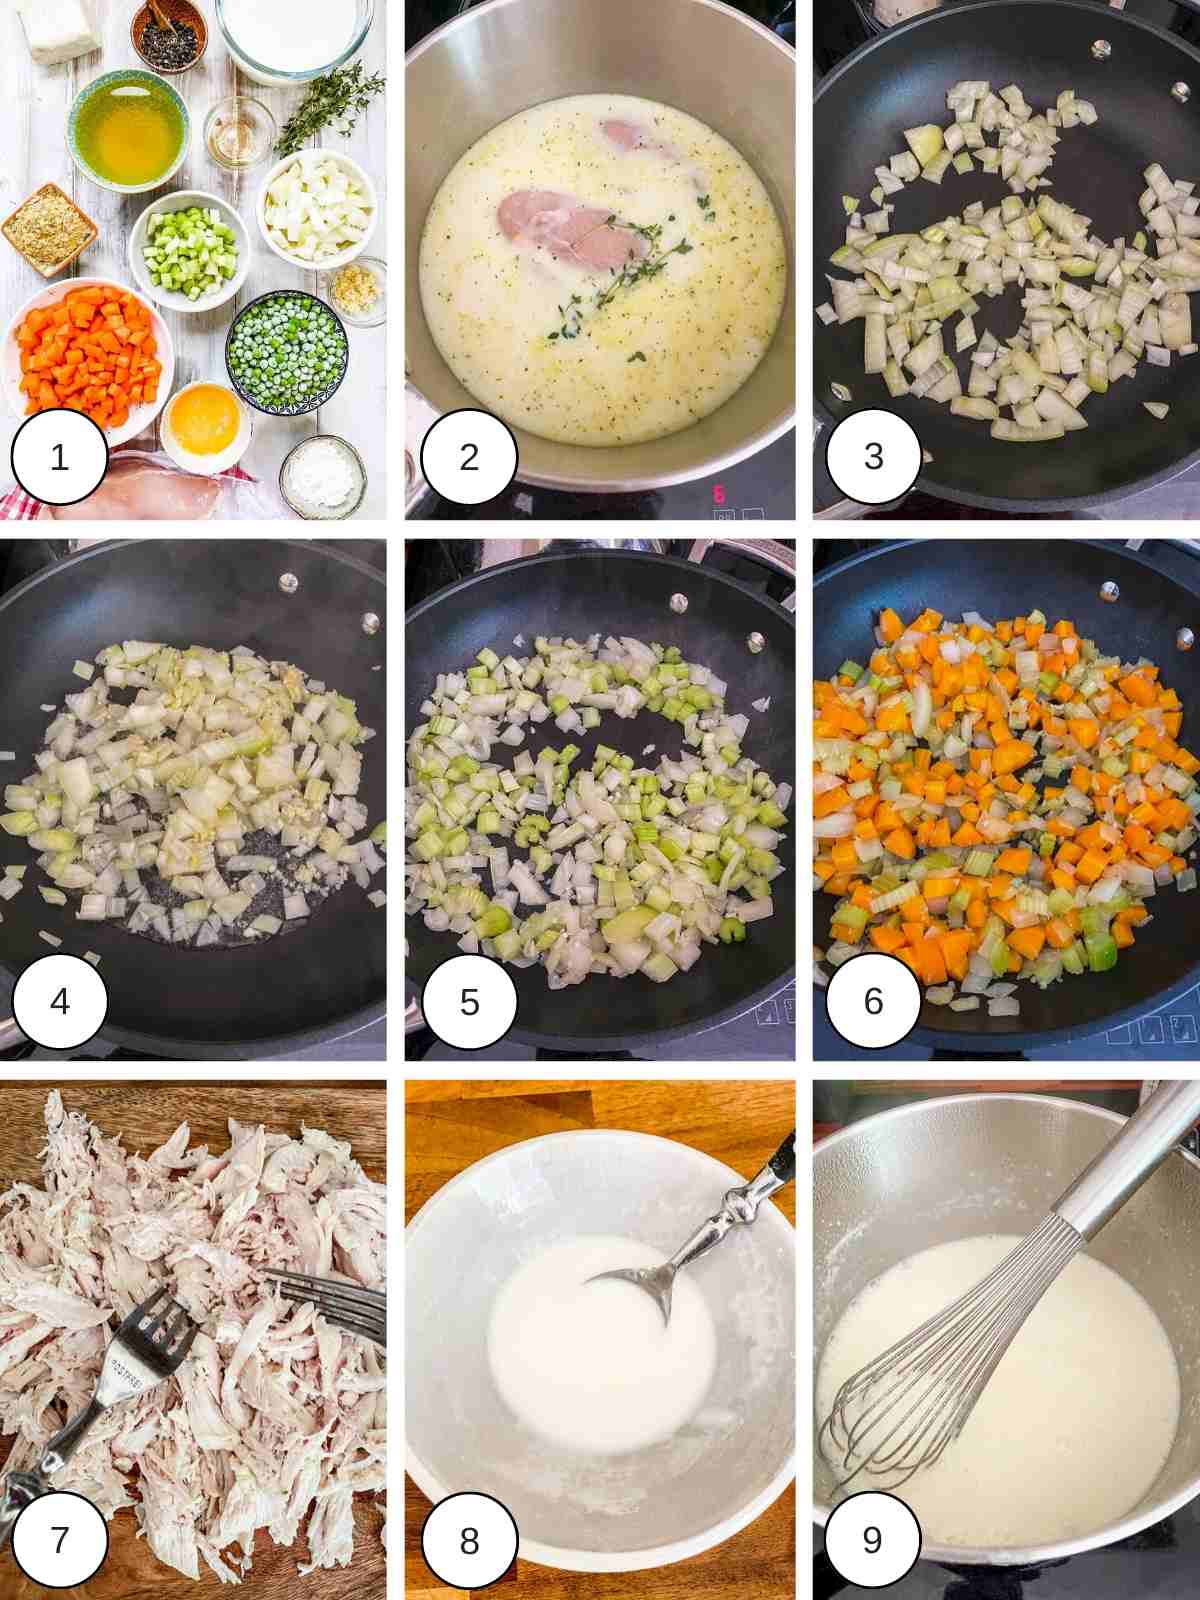 9 pictures showing the process of making WW chicken Pot pie.